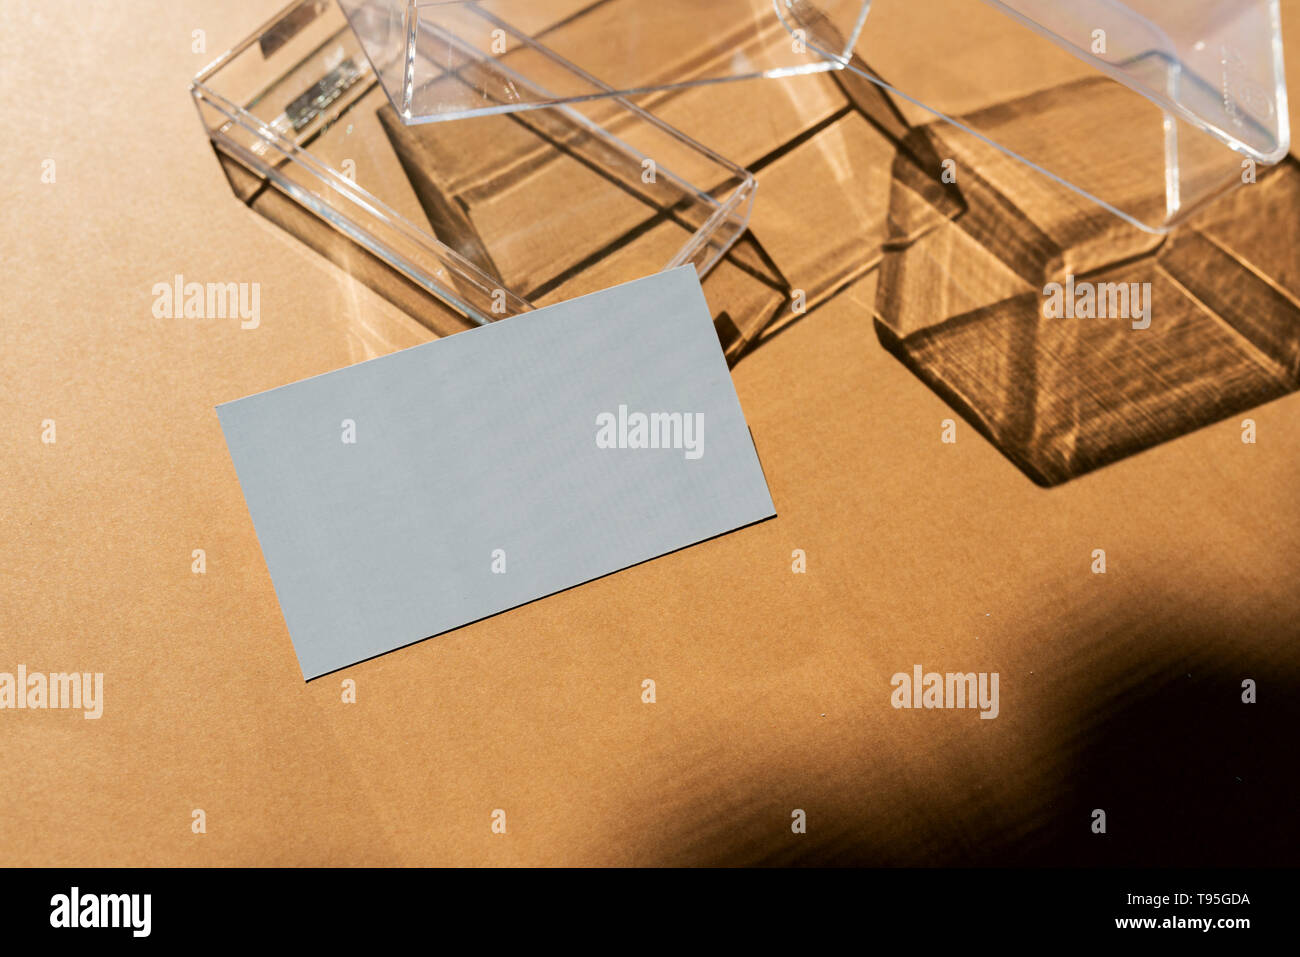 Blank business cards on transparent box, and direct light forming geometric shadows Stock Photo